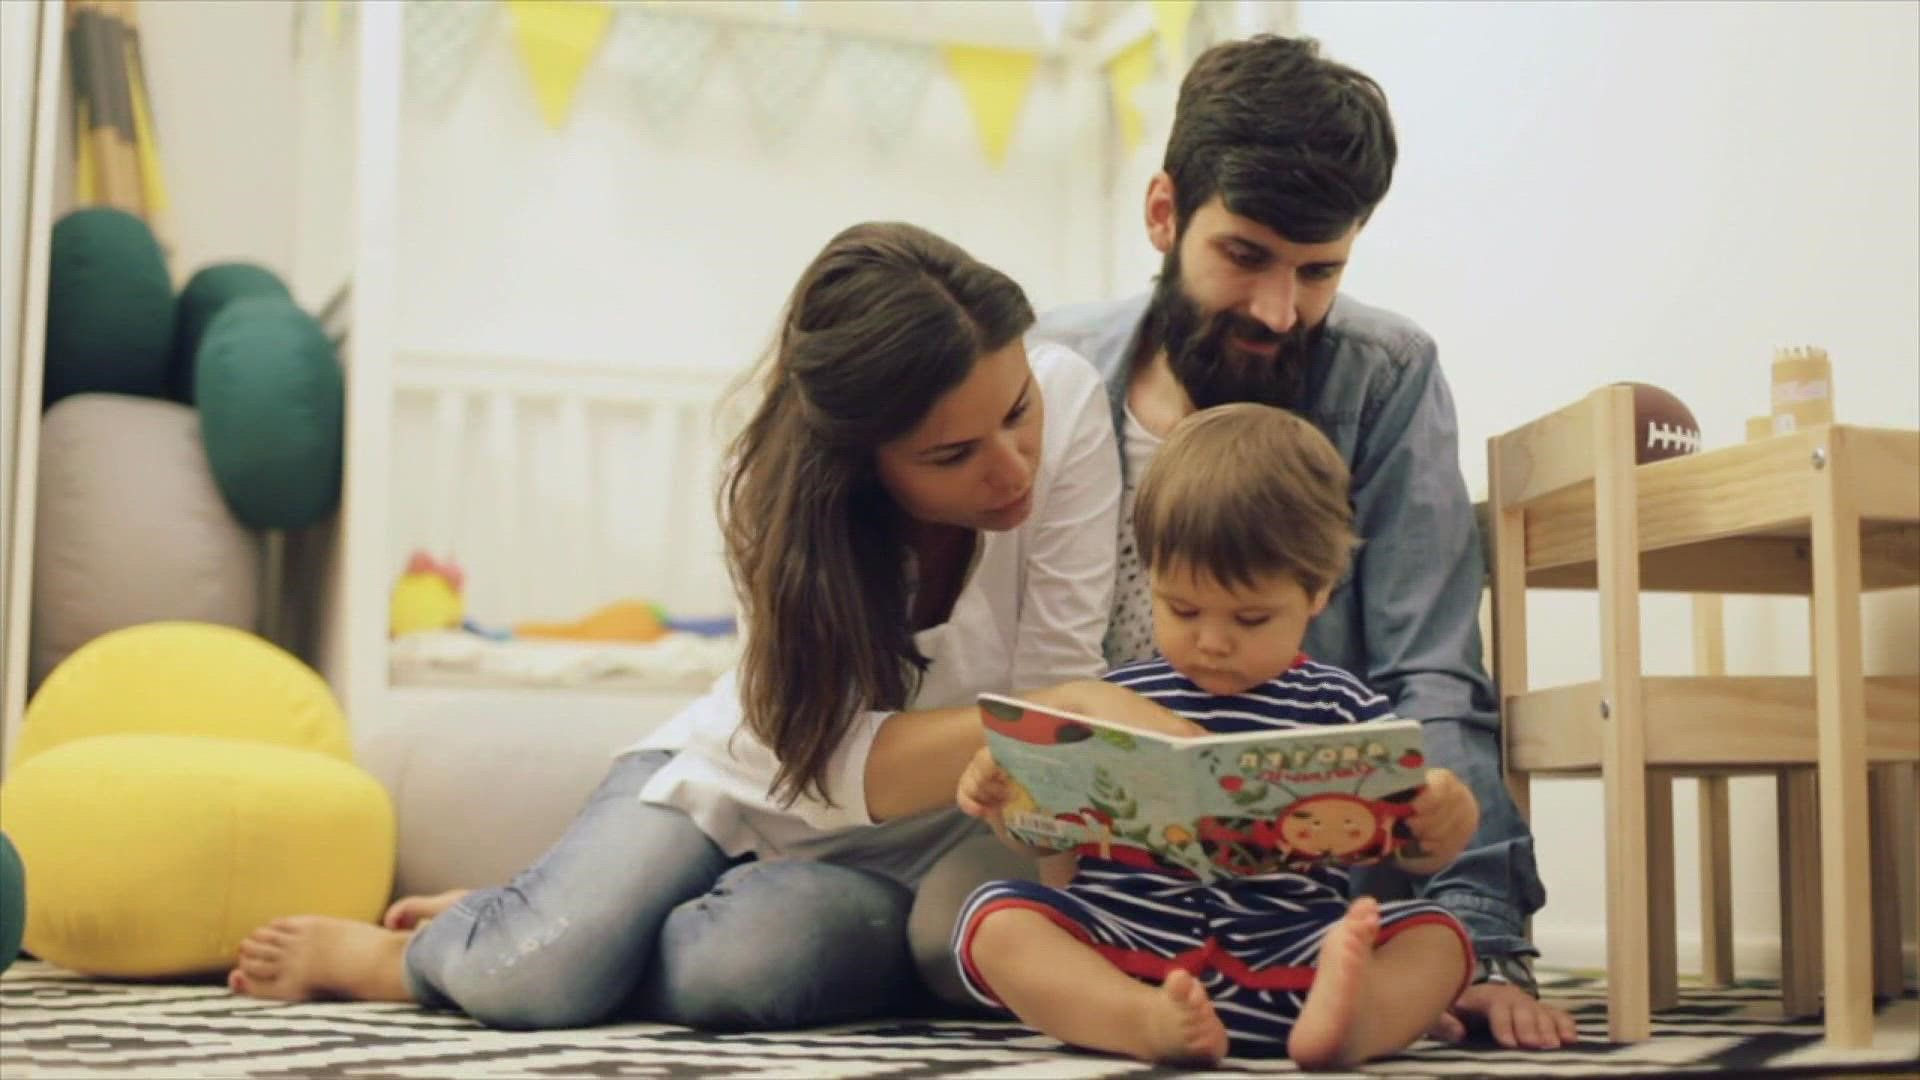 The hospital says reading to a baby every day strengthens their hearing and brain growth, and encourages a lifelong relationship with books.